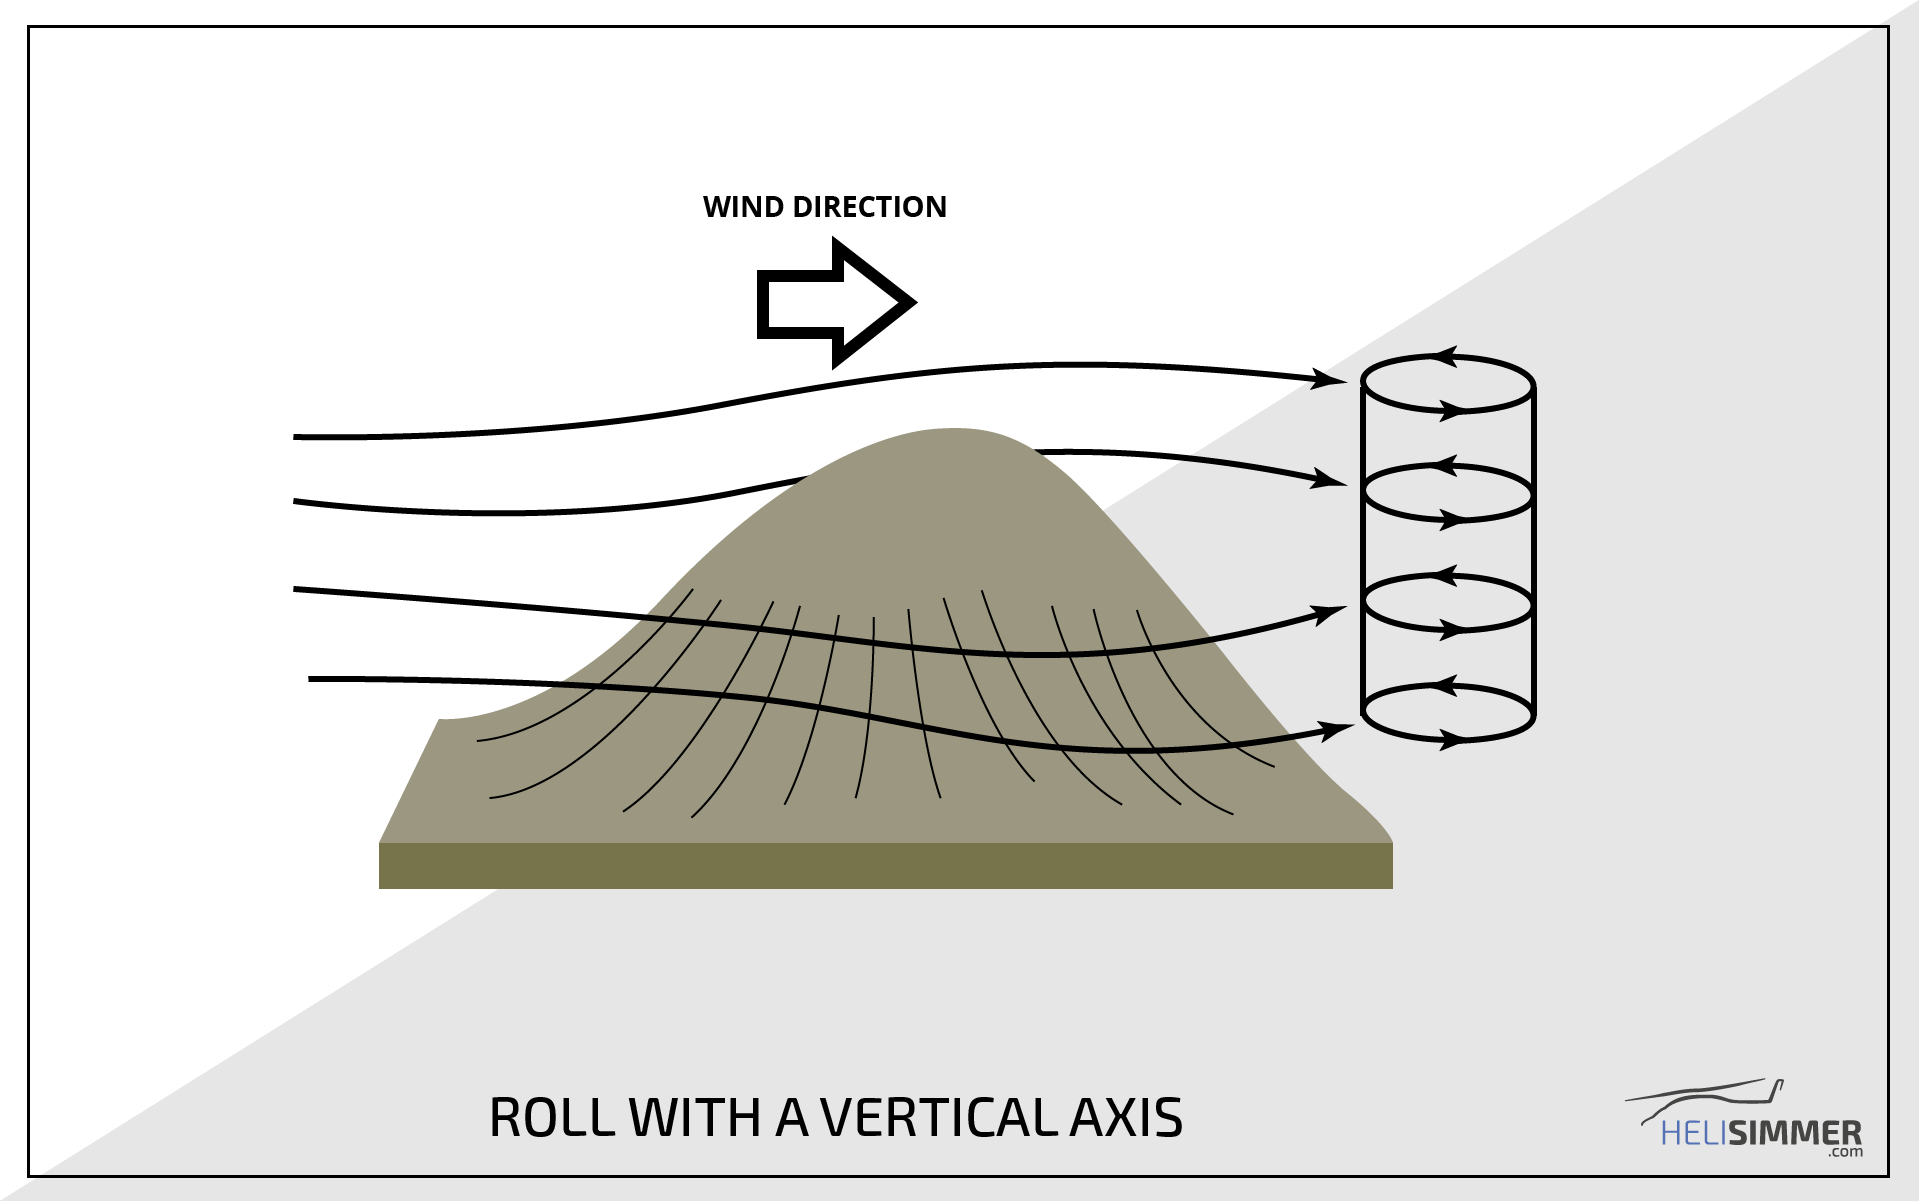 Roll with a vertical axis